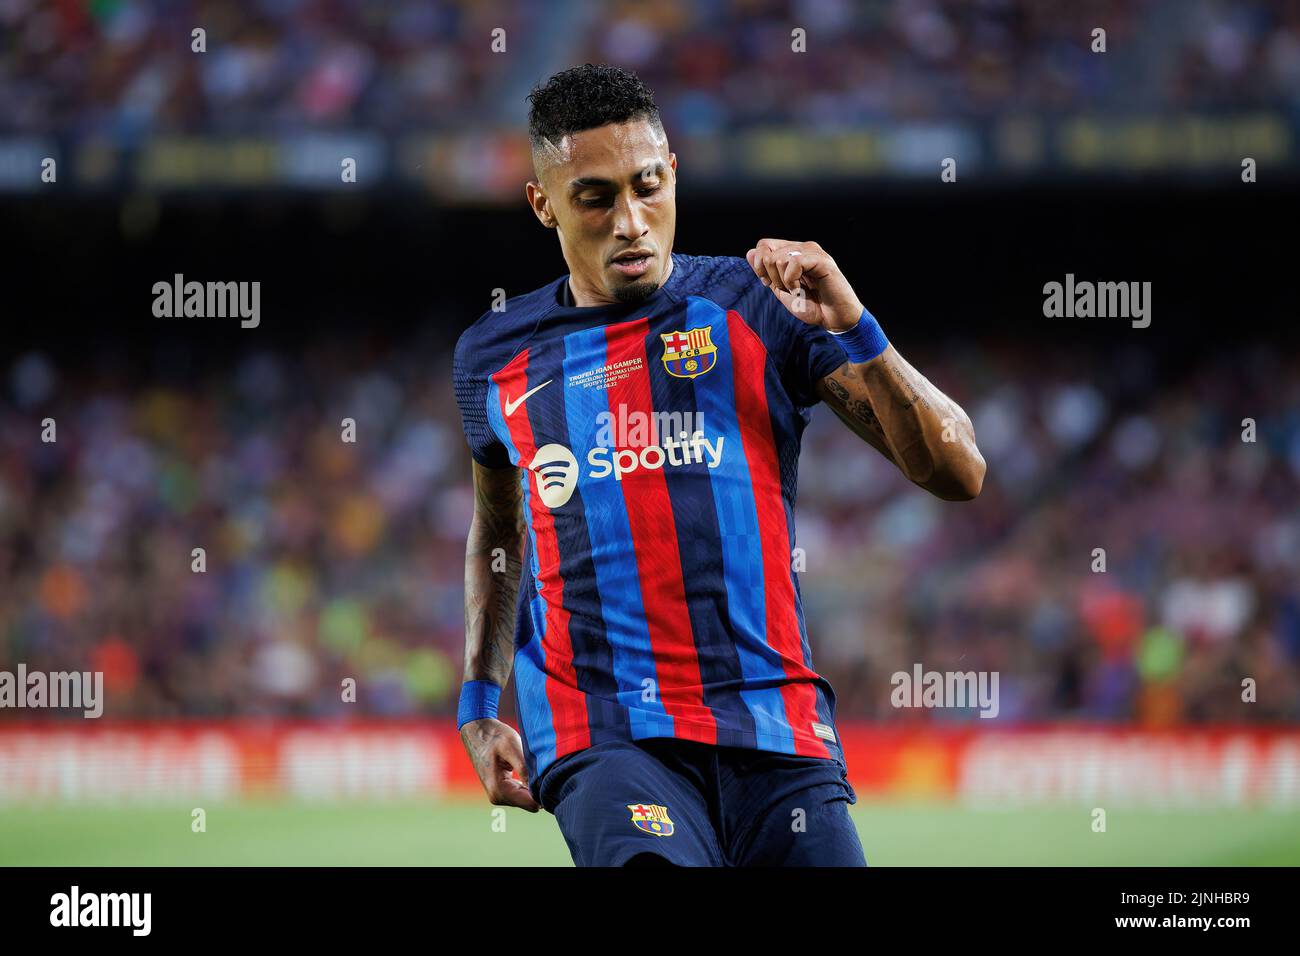 BARCELONA - AUG 7: Raphinha in action during the Joan Gamper Throphy match between FC Barcelona and Pumas at the Camp Nou Stadium on August 7, 2022 in Stock Photo